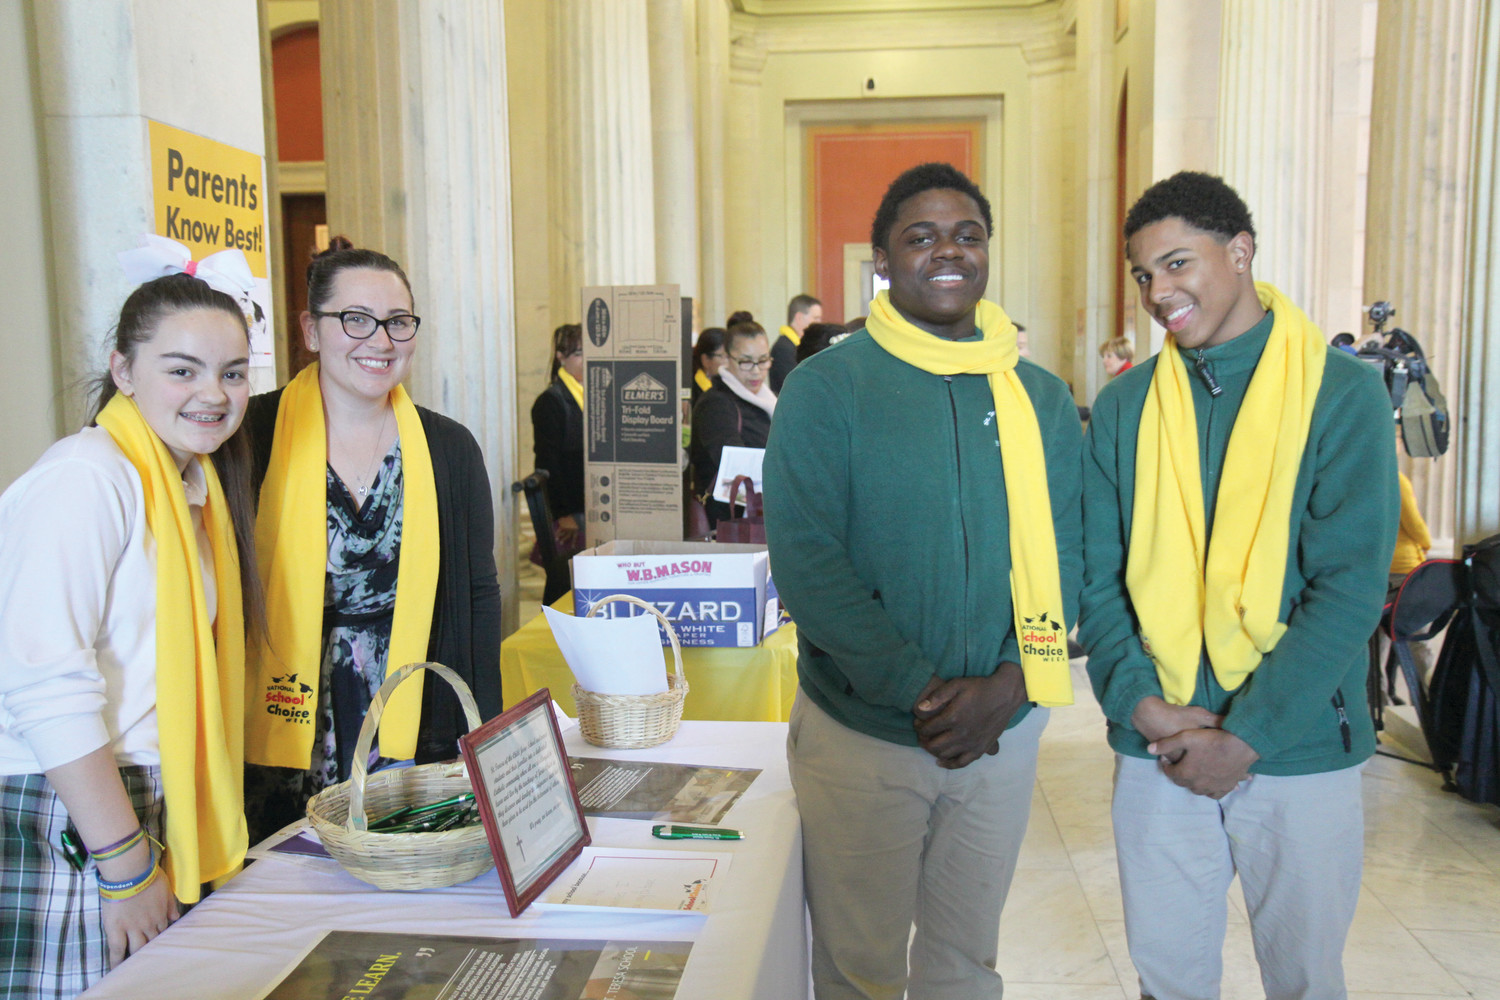 Students from St. Teresa School, Pawtucket, stand with their principal, Allison Amodie, to represent their school at the annual School Choice Rally at the Rhode Island State House. From left to right are sixth-grader Hannah Guevremont, Principal Amodie and eighth graders Elijah Osei and Henique Ross.